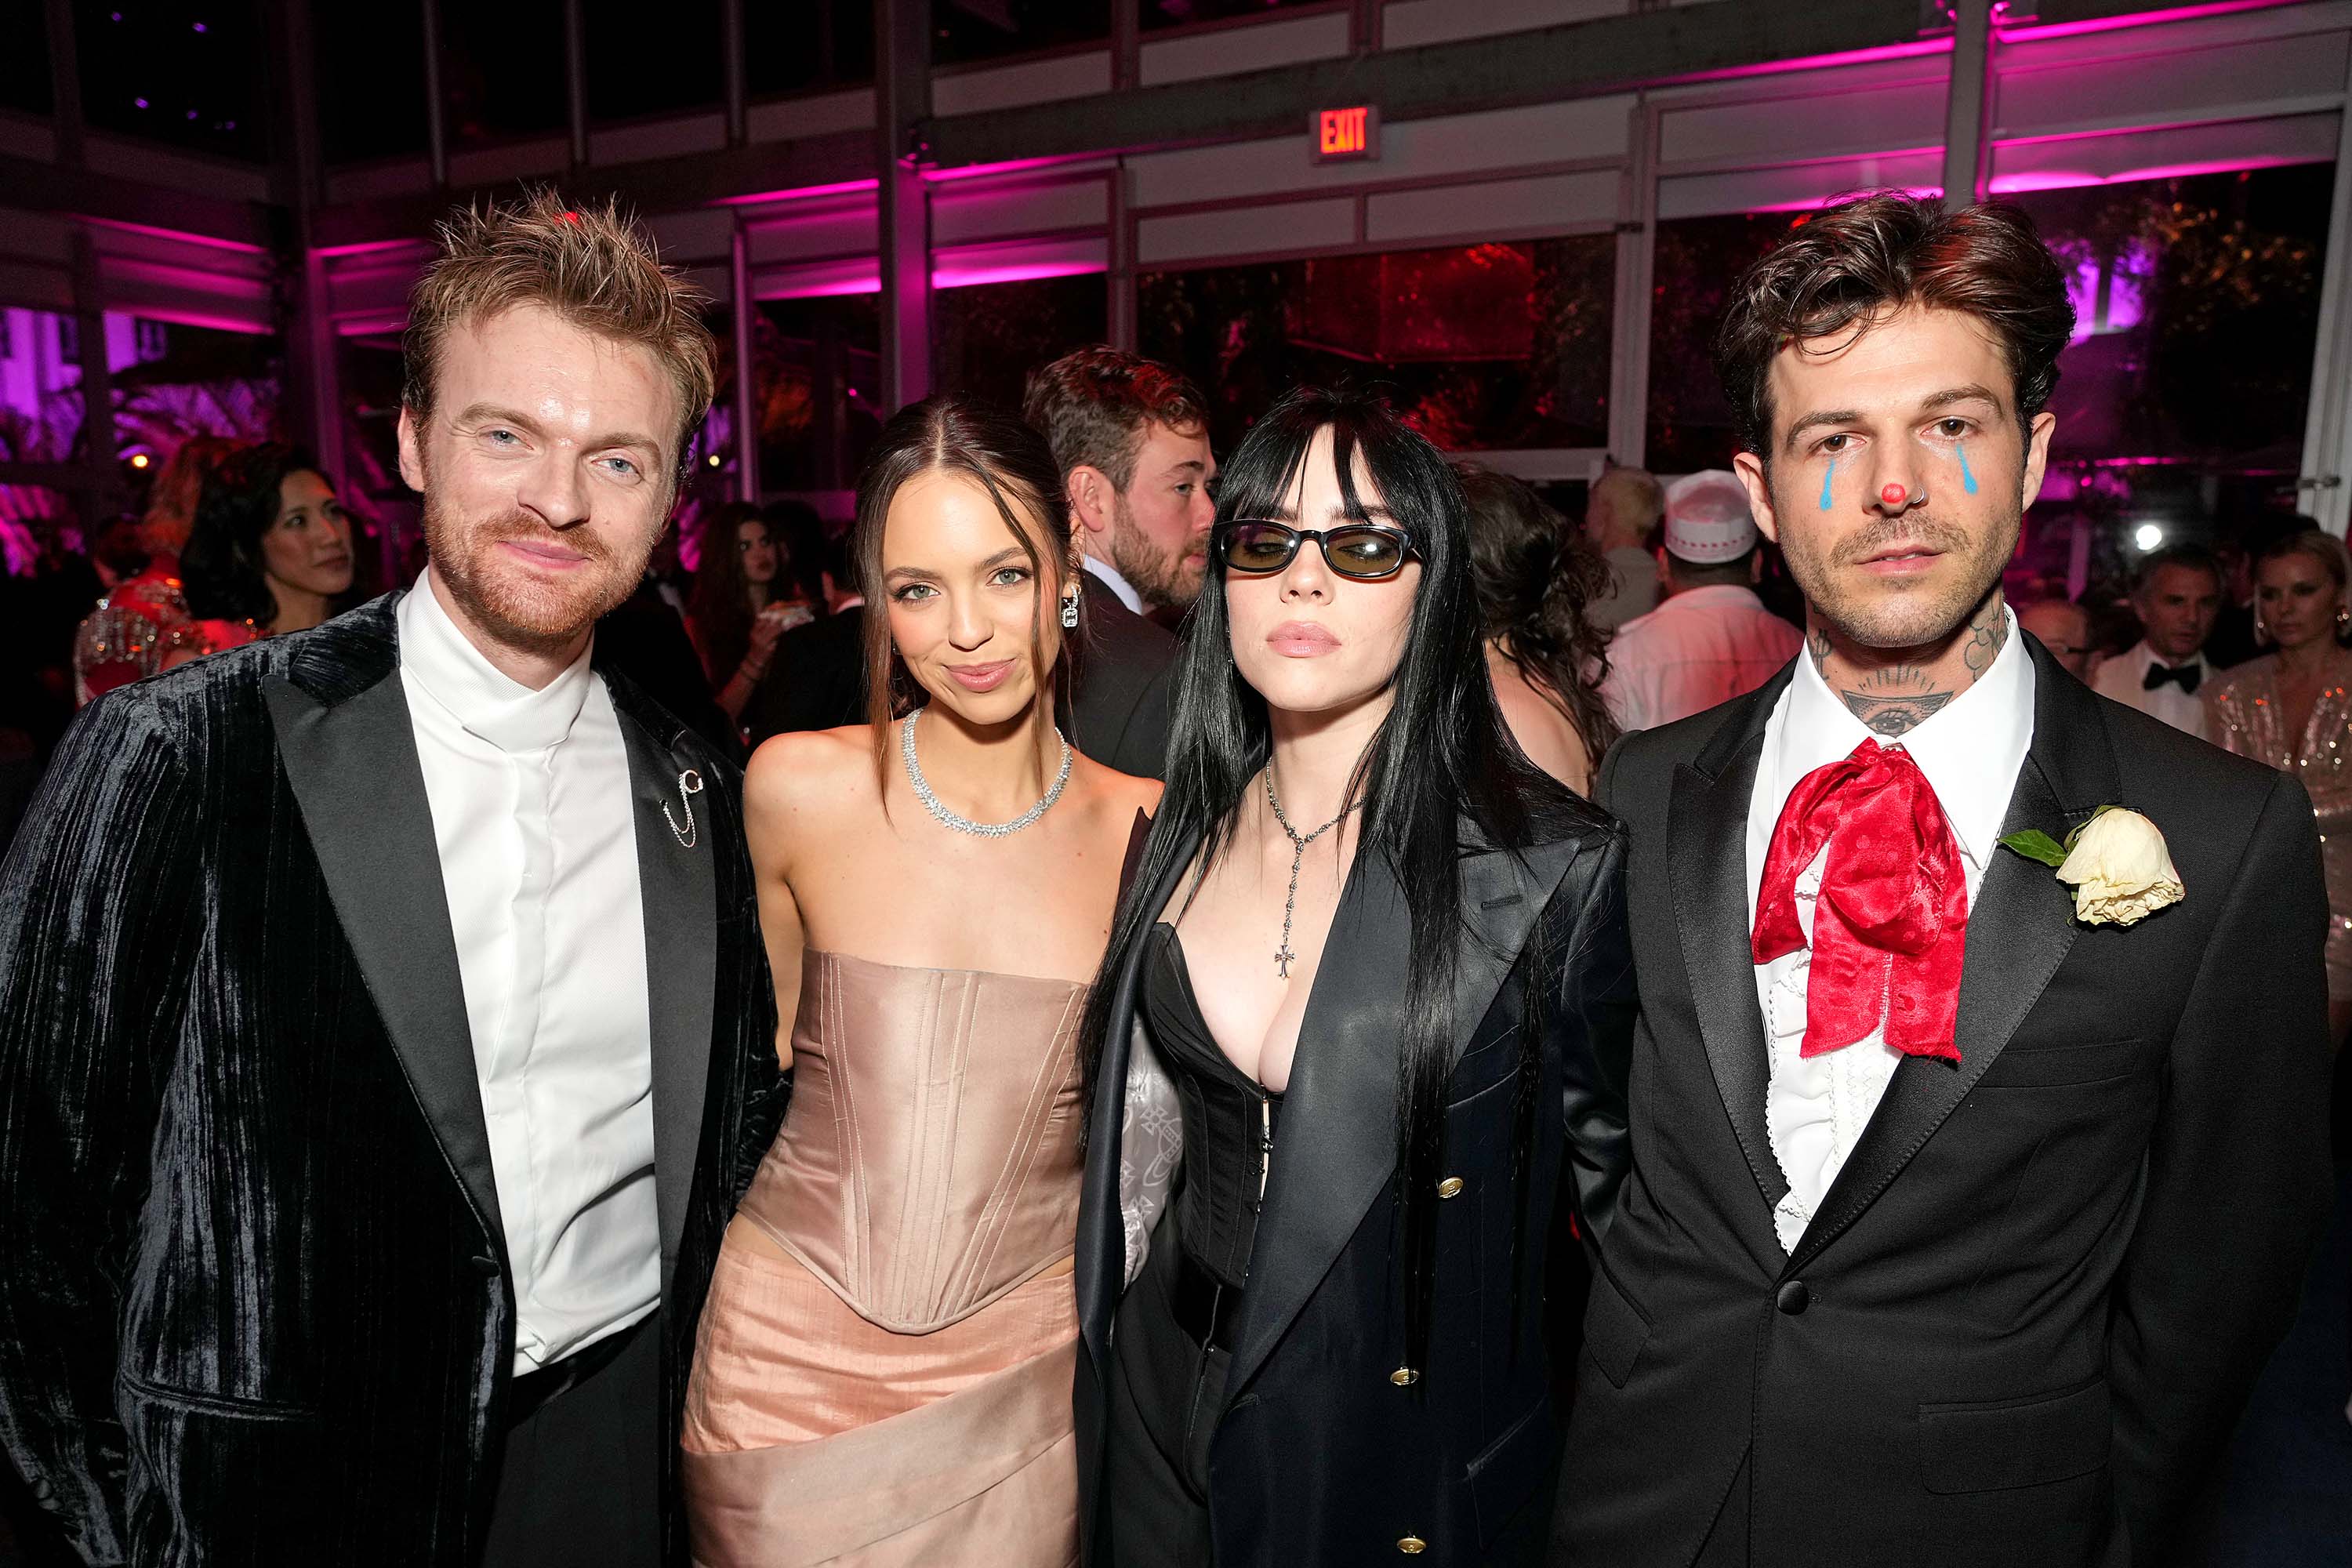 What it was like inside the Vanity Fair Oscar Party